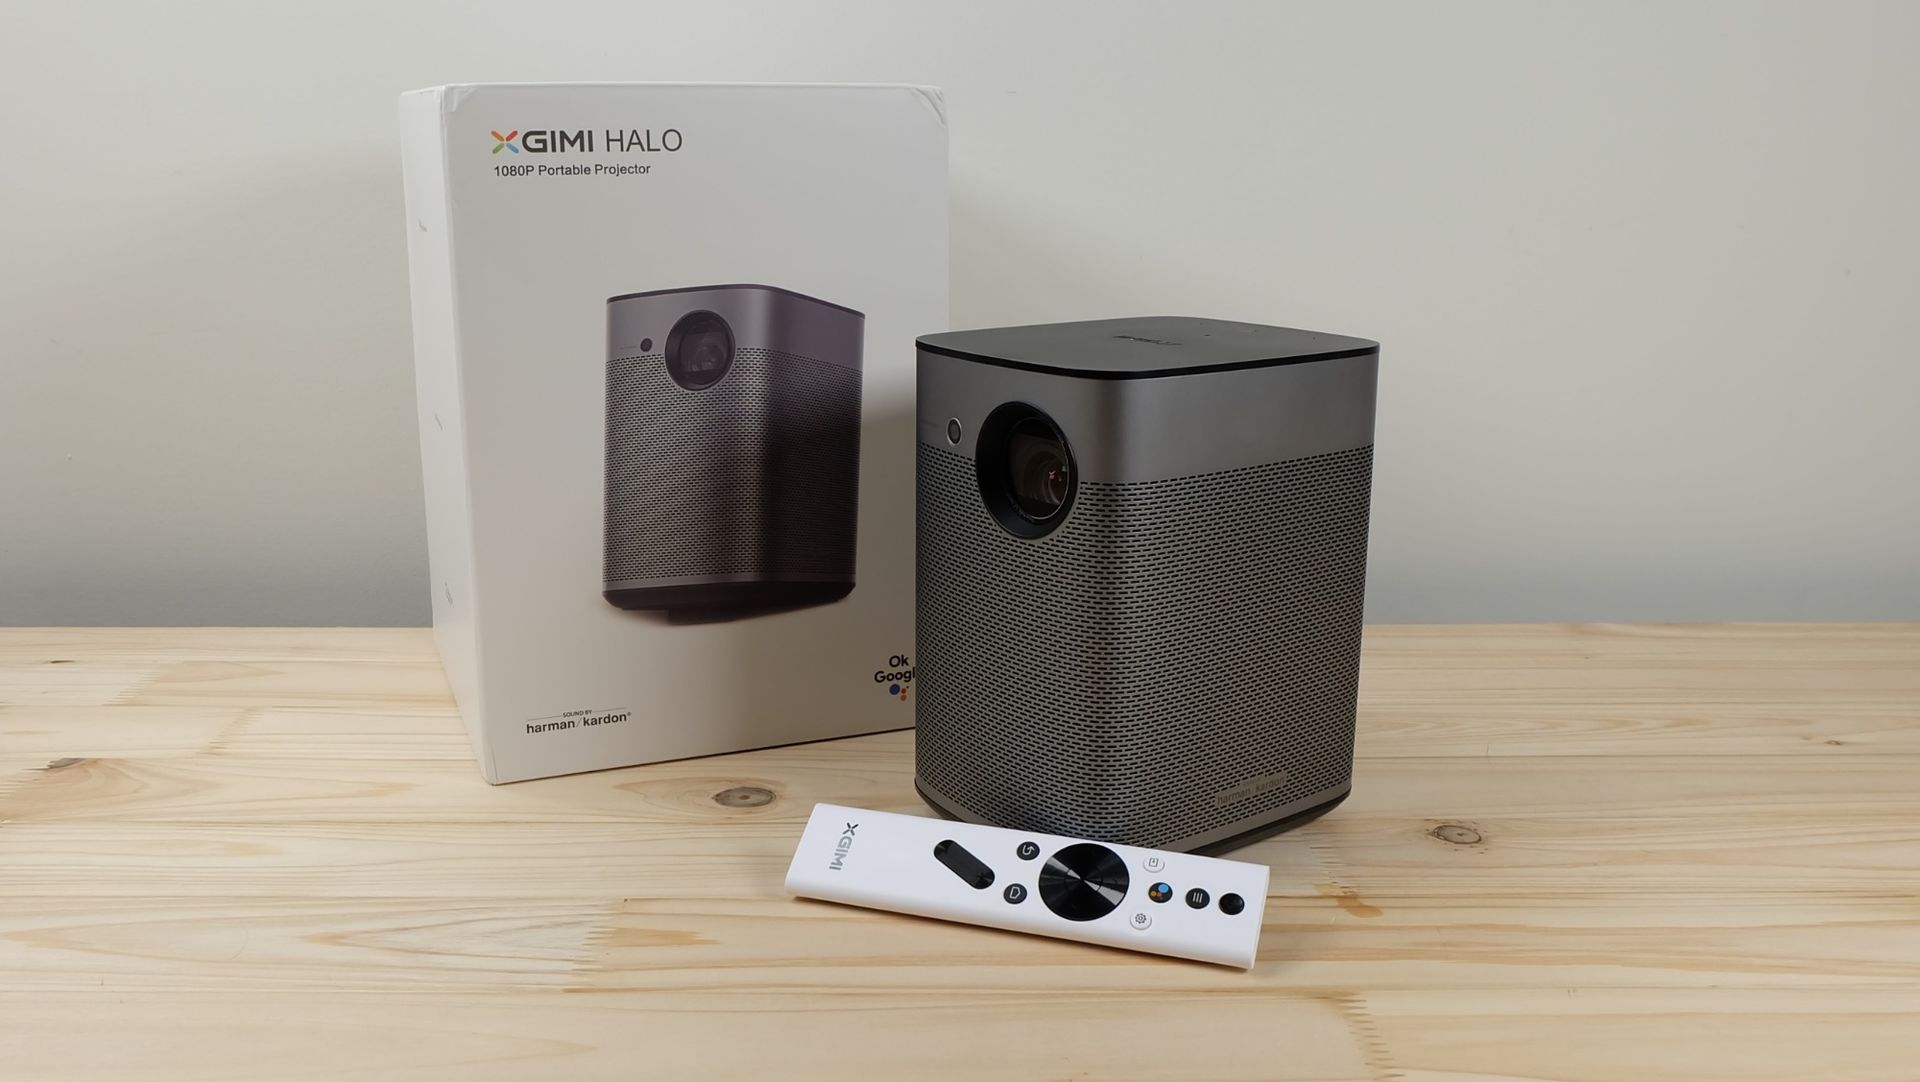 XGIMI Halo Portable Android TV Projector Review - XGIMI Halo Portable  Android TV Projector